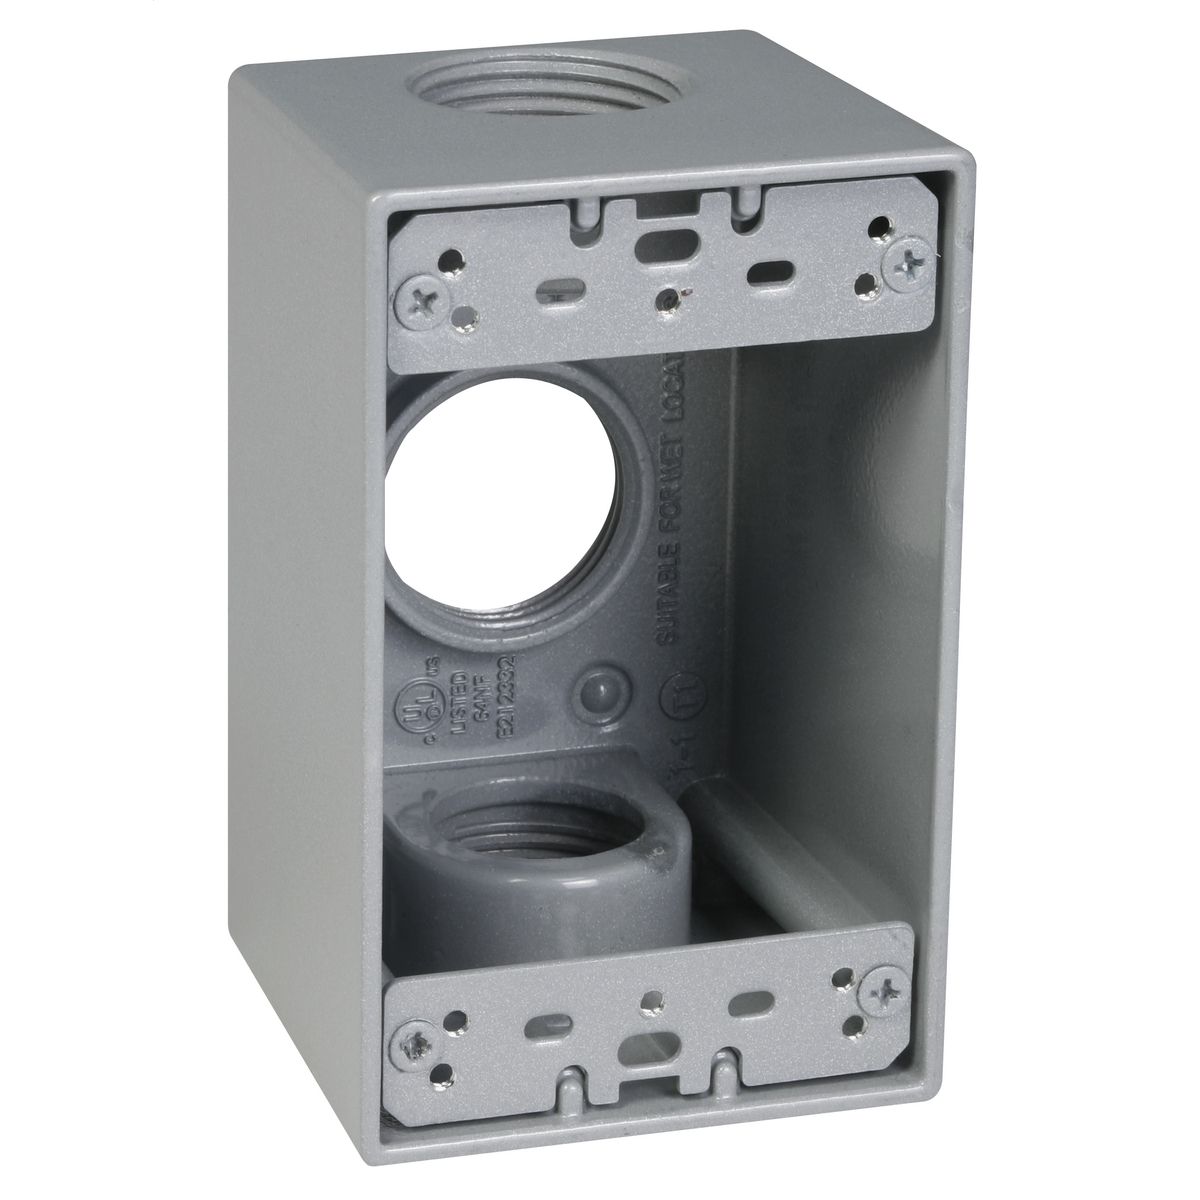 TAY SB3100S 1G WP BOX (3) 1 IN. OUTLETS - GRAY